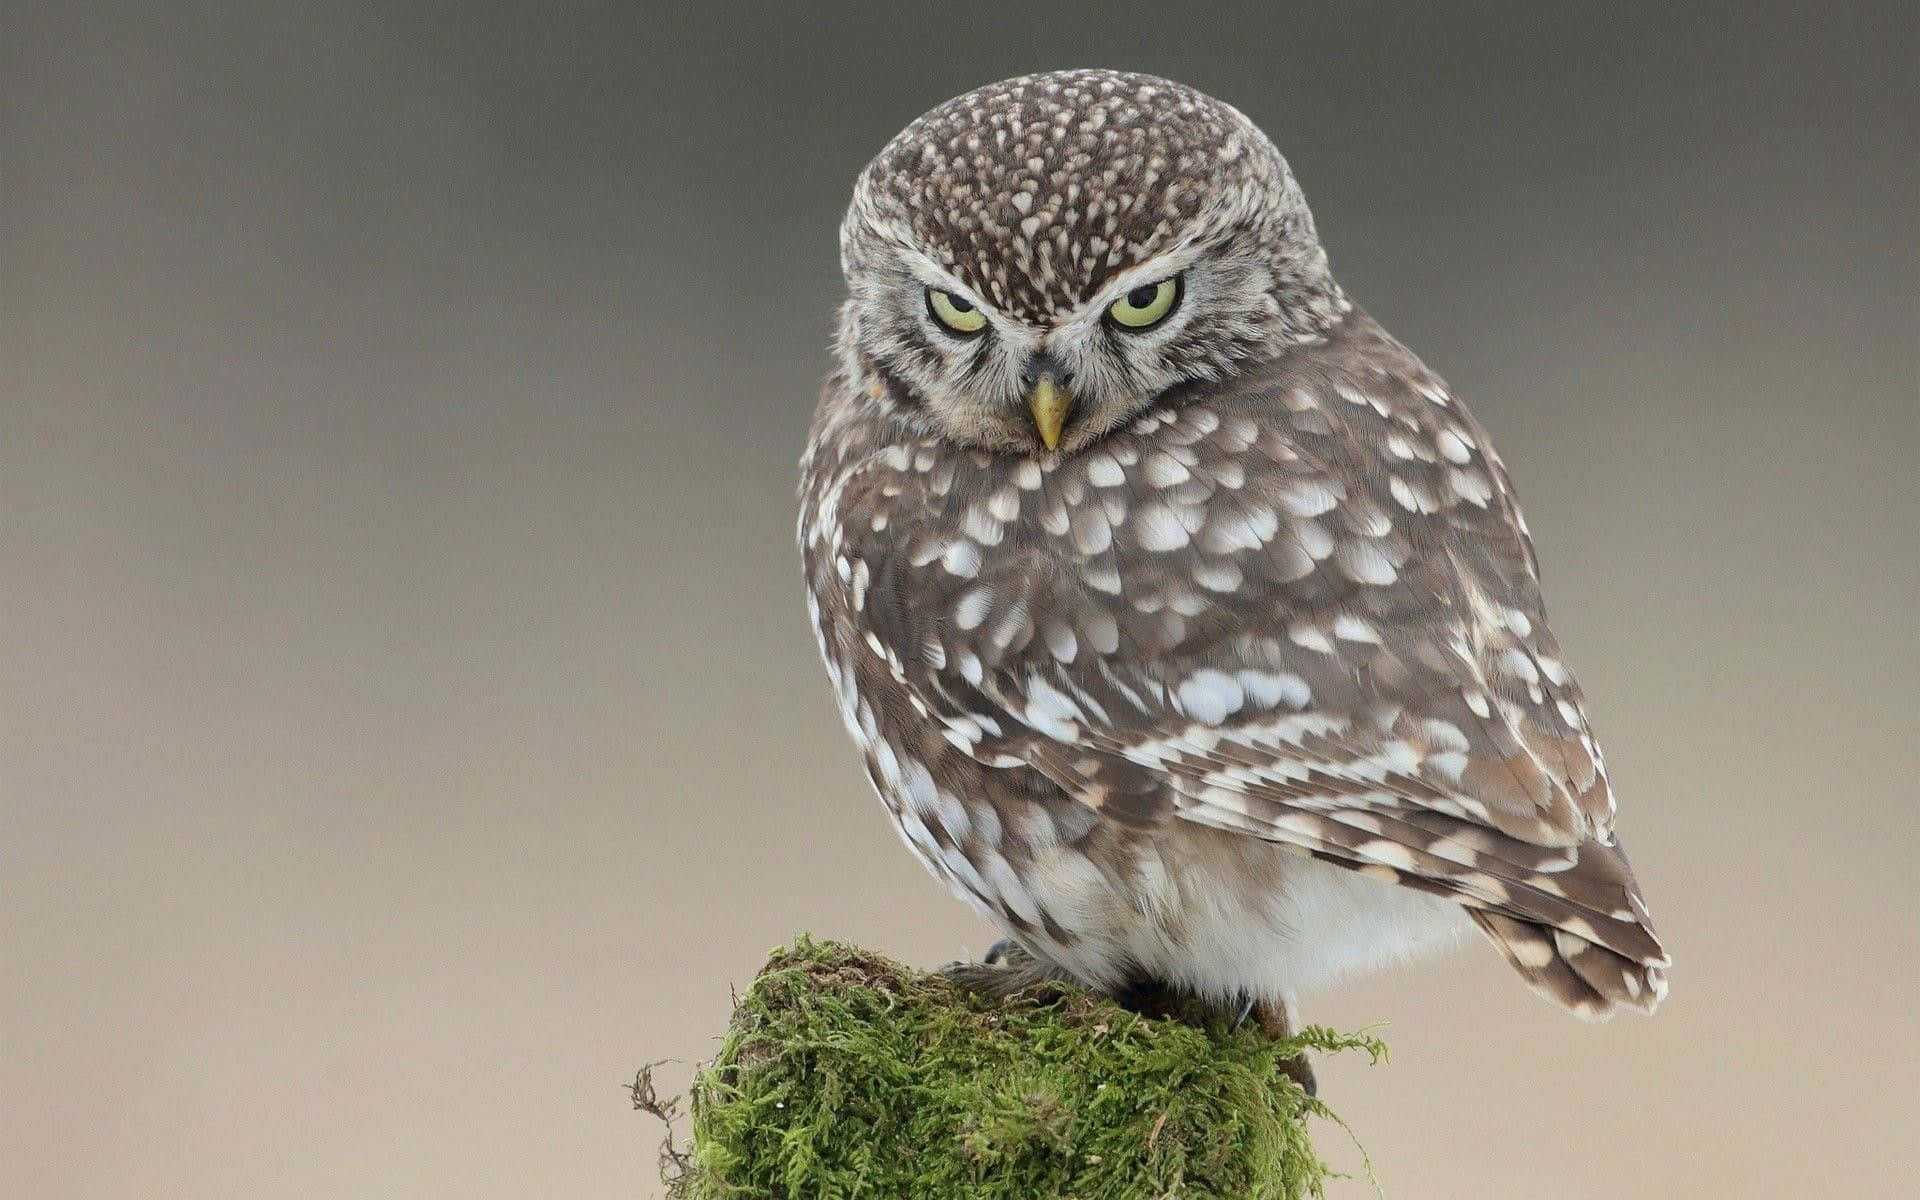 A Small Owl Is Sitting On Top Of A Mossy Stump Background